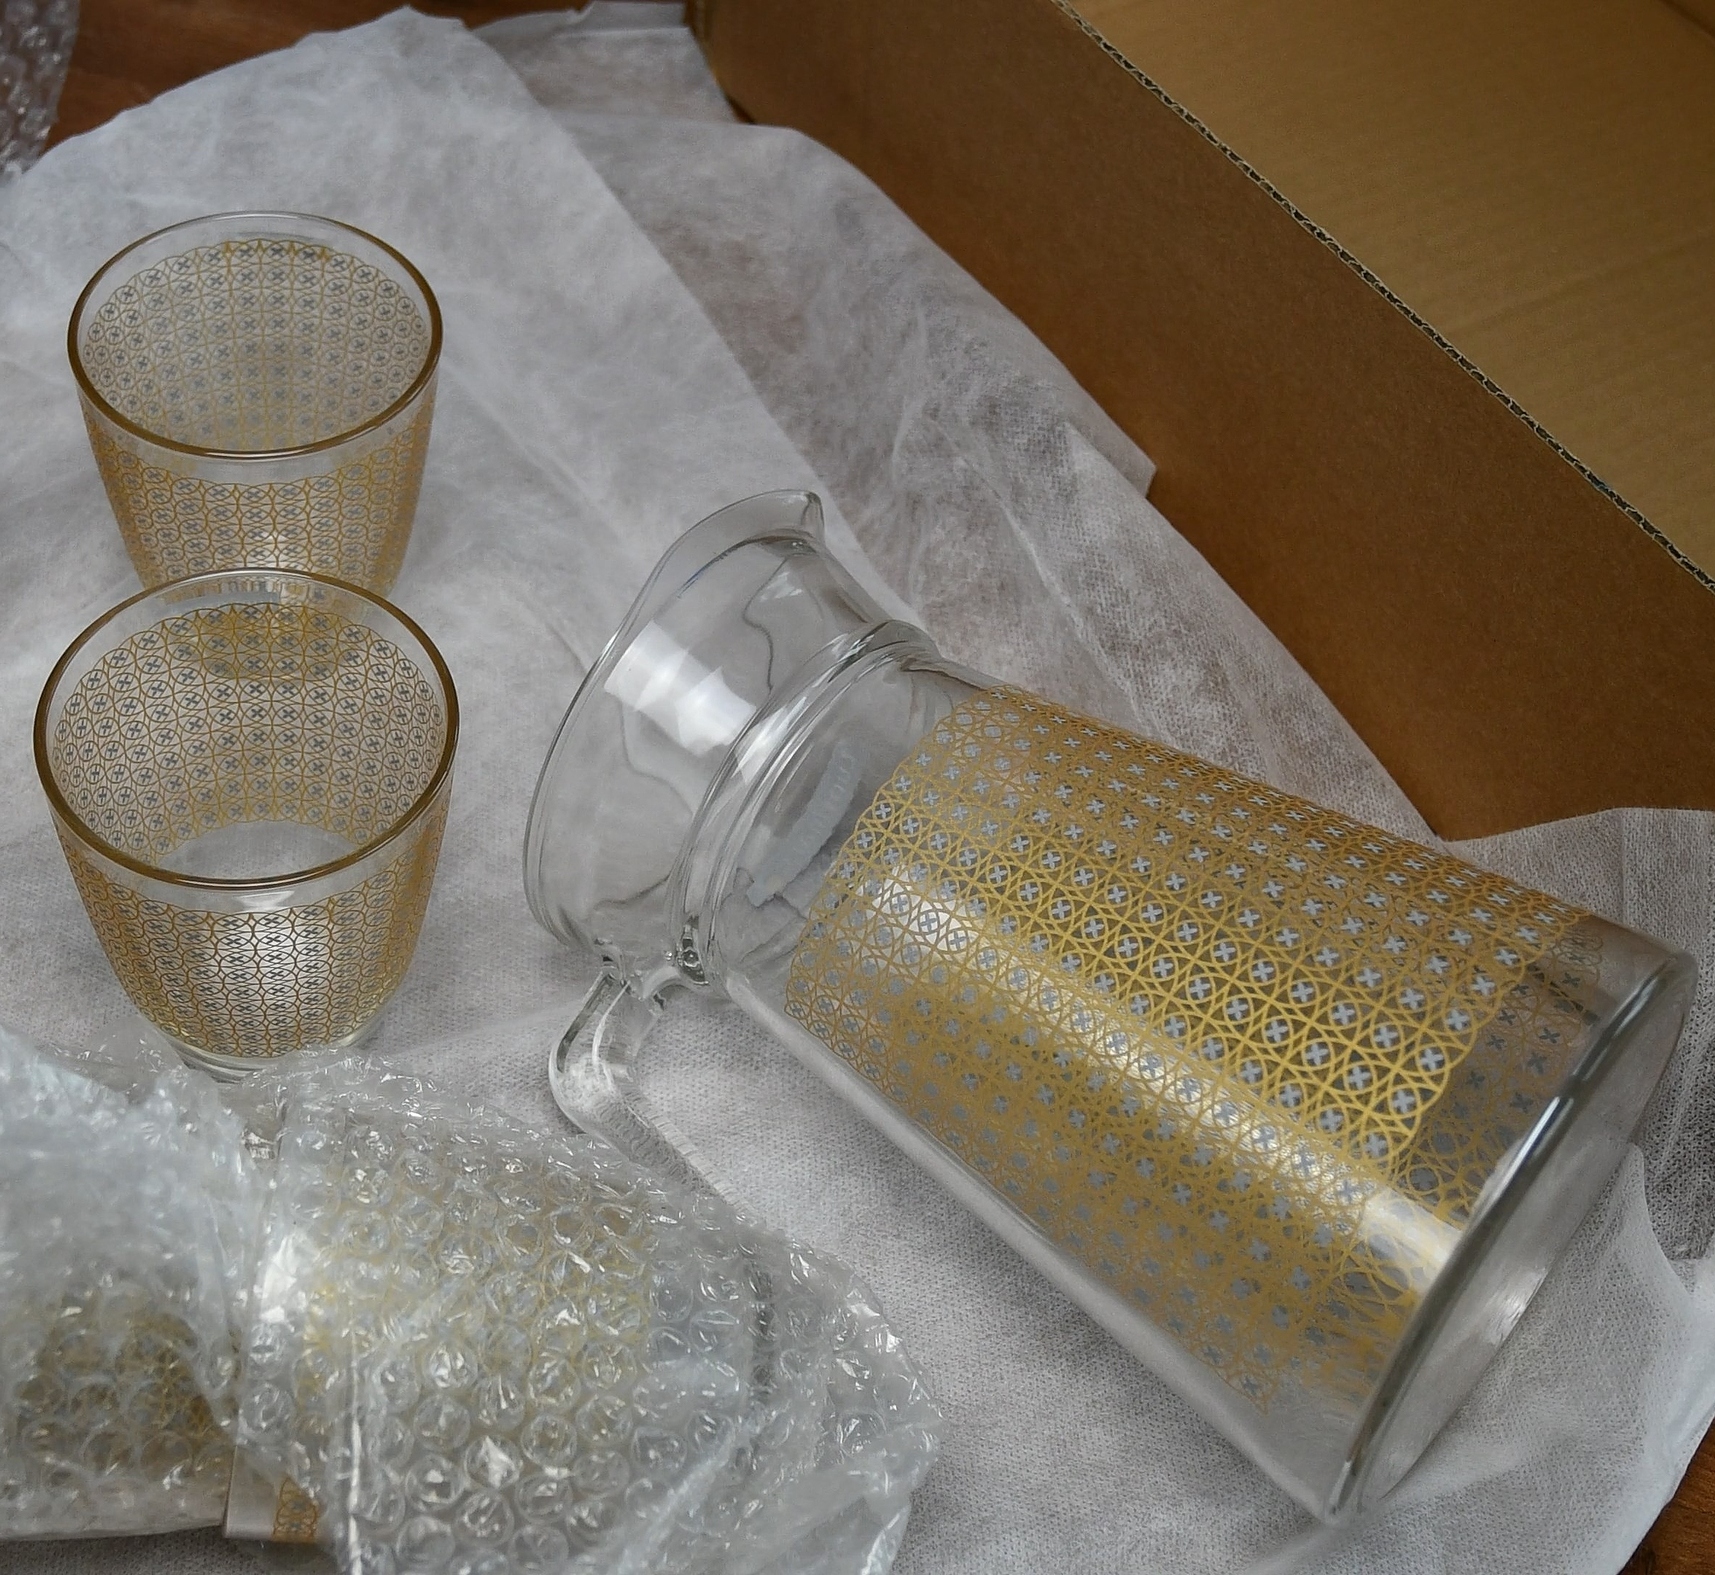 Fragile Safety: How to Pack Glassware for Shipping?